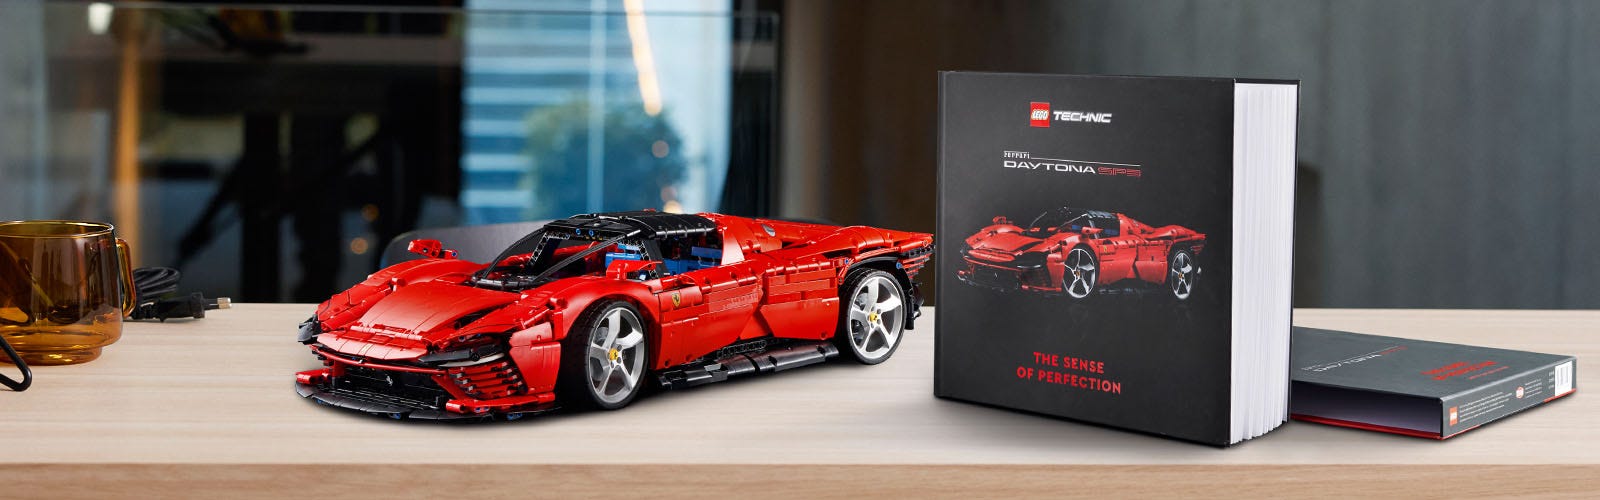 An exclusive extract from our new book – LEGO® Technic™ Ferrari Daytona  SP3: The Sense of Perfection